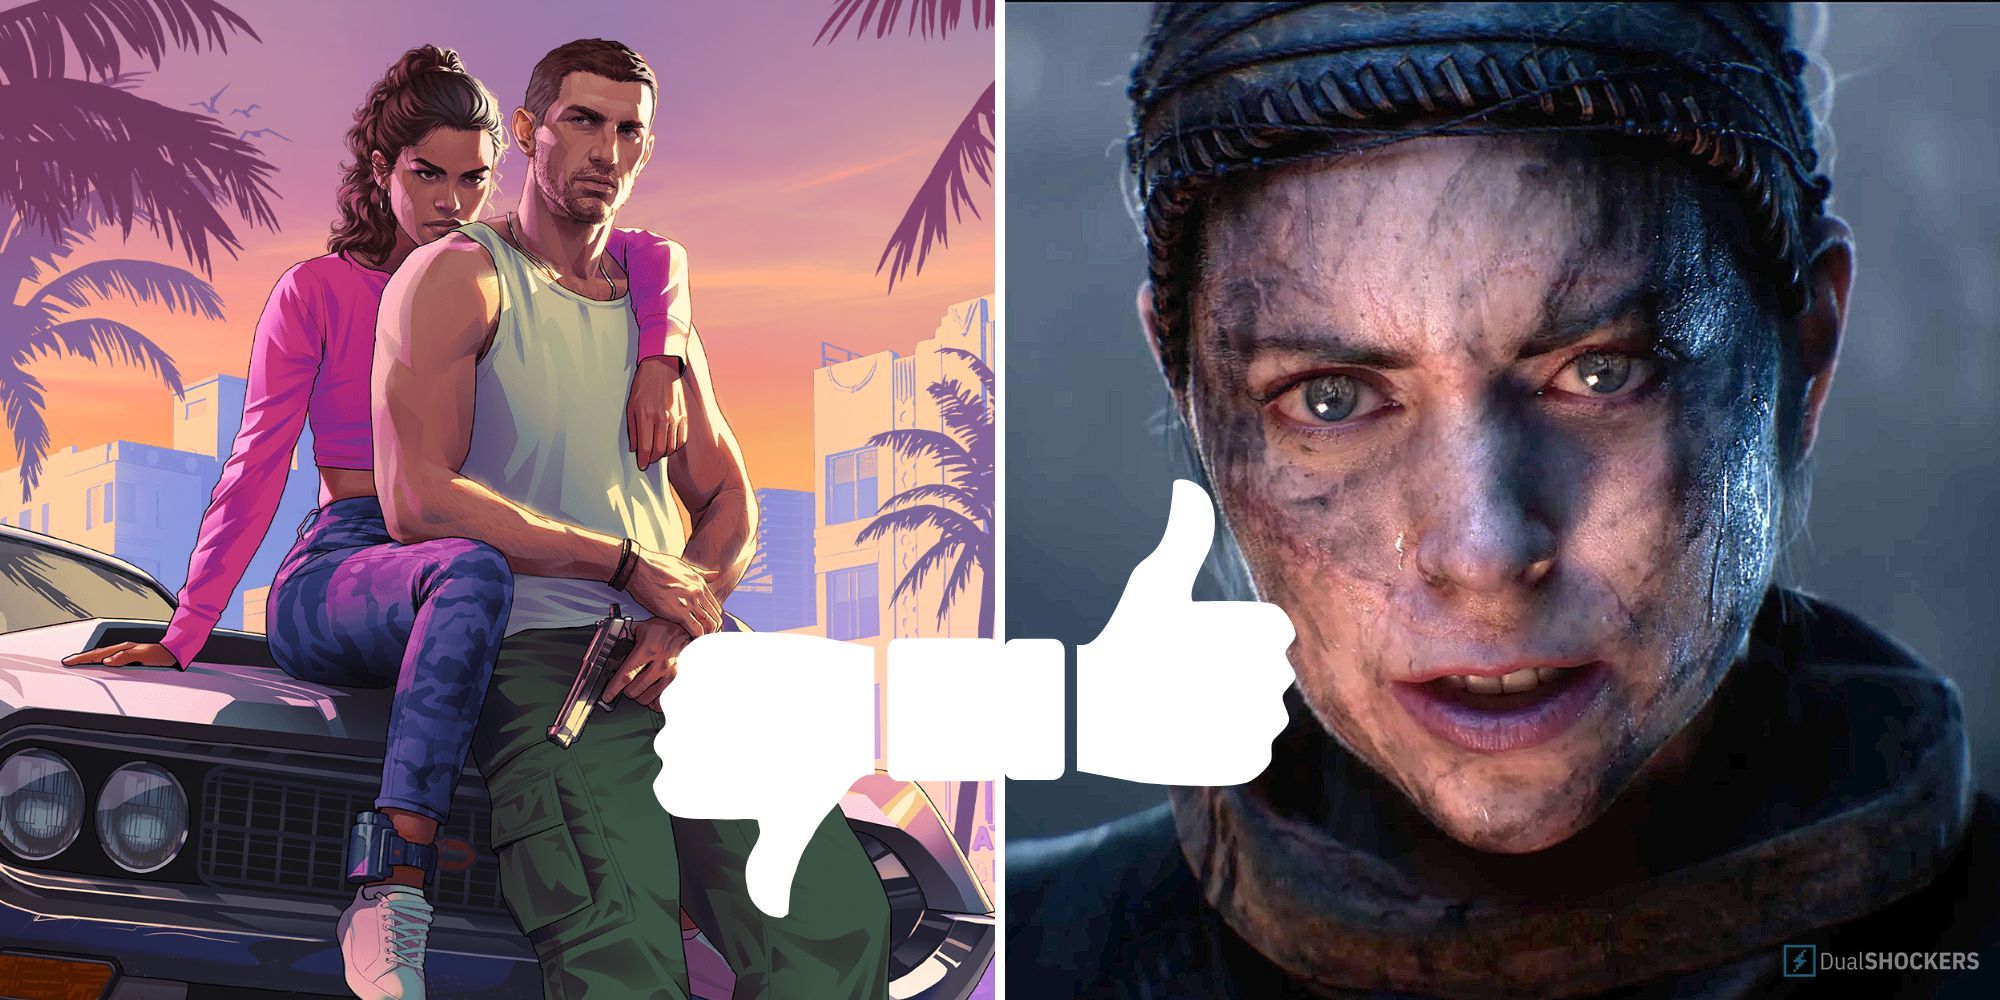 Split image of Senua's face from Senua's Saga: Hellblade 2 and the protagonists from Grand Theft Auto 6 with two white thumbs in the middle.